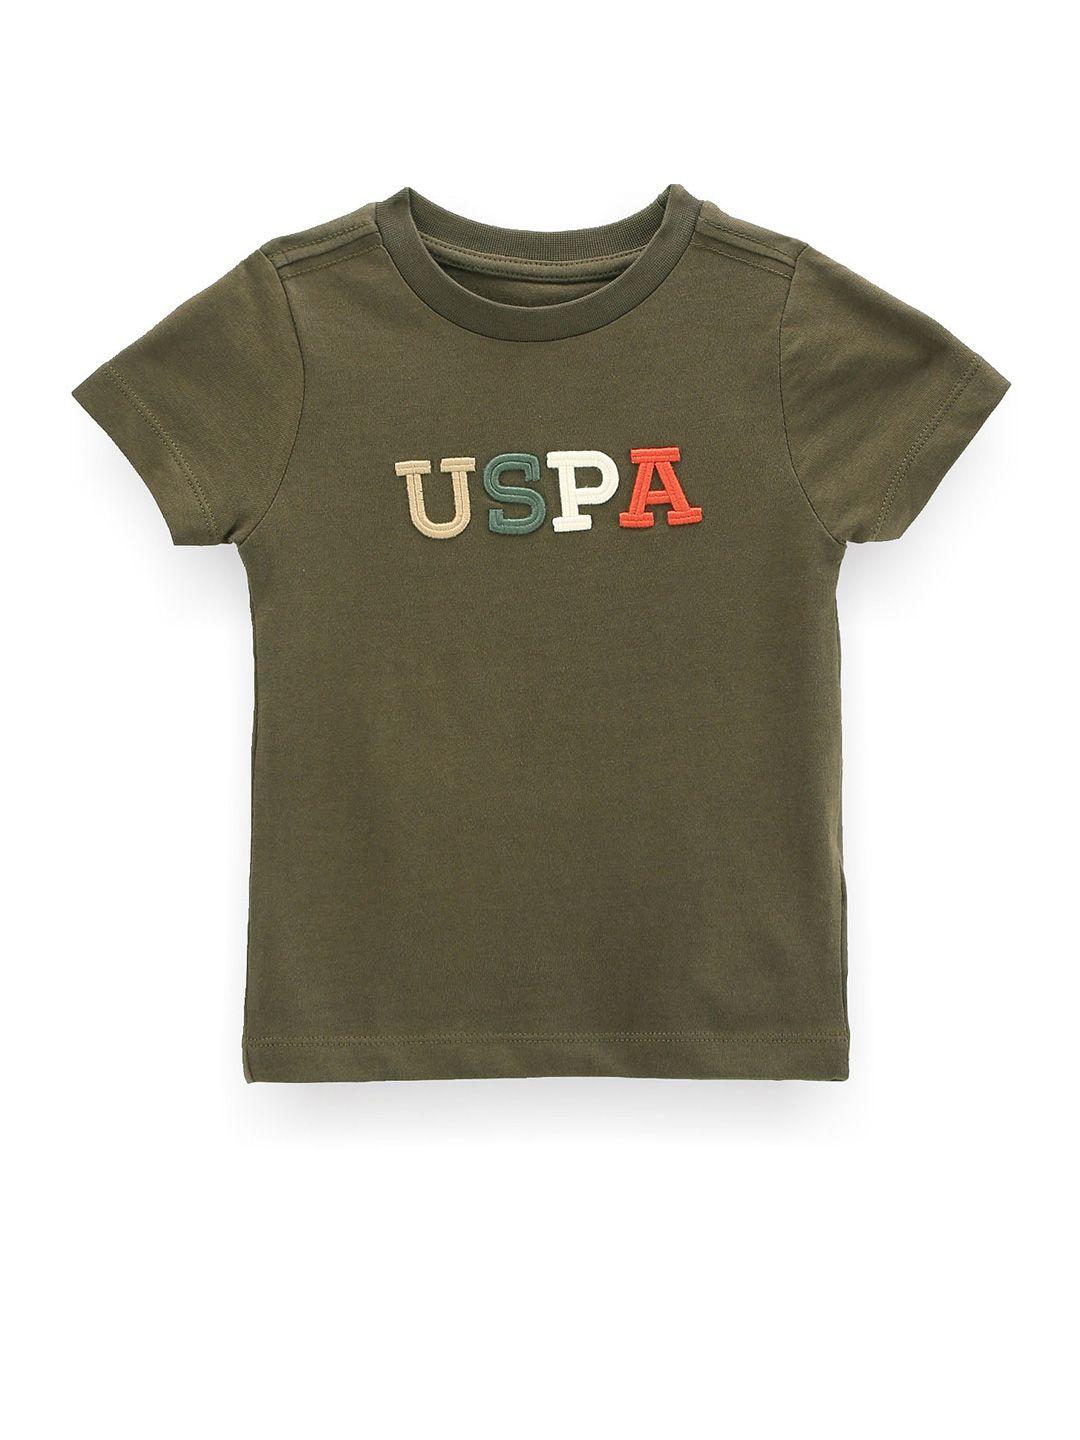 u.s. polo assn. kids boys embroidered detail pure cotton t-shirt